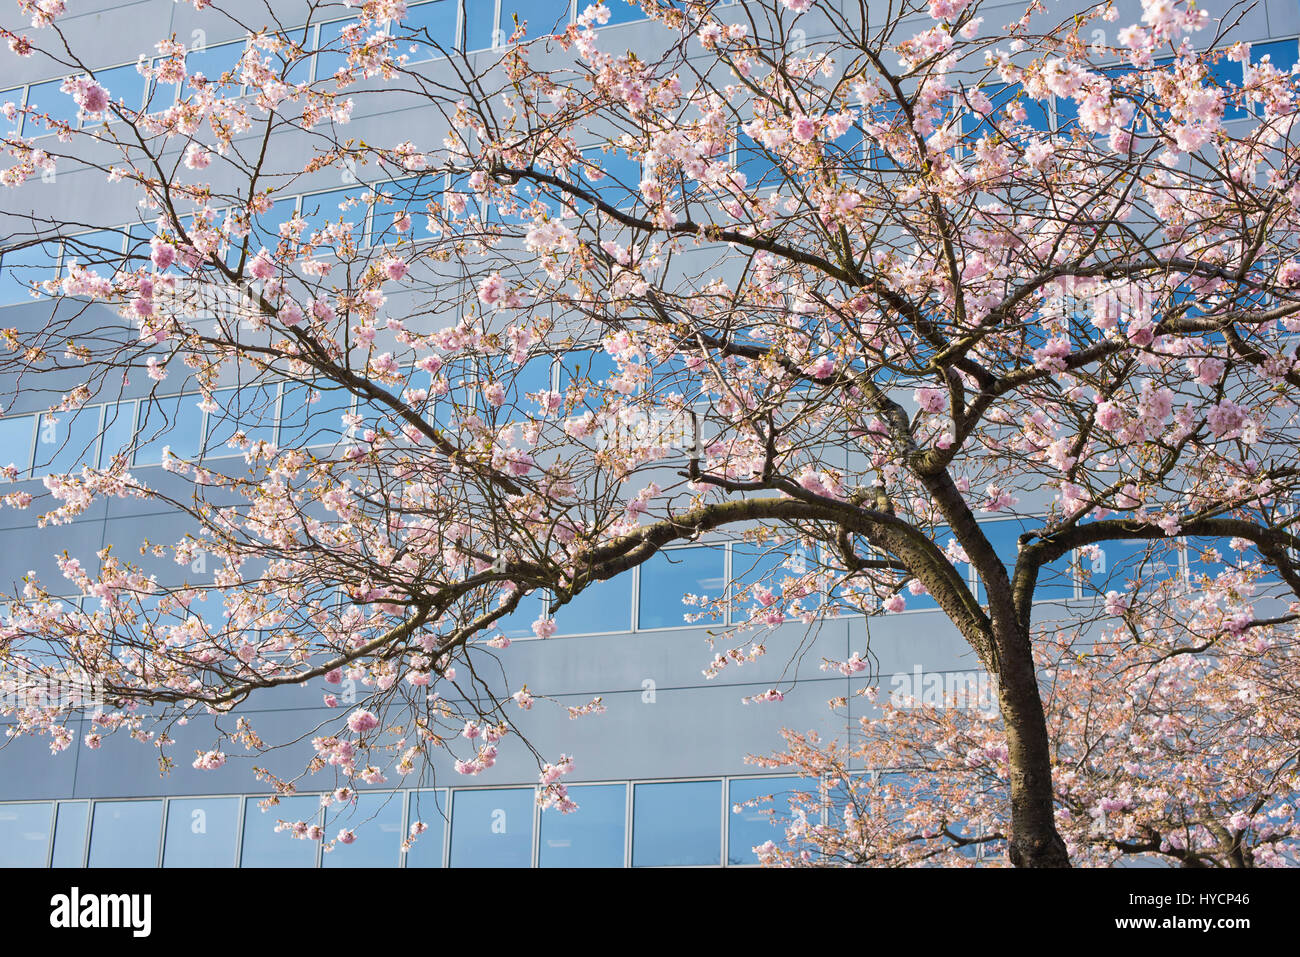 Prunus. Cherry trees in blossom in late march. Central Milton Keynes, Buckinghamshire, England Stock Photo